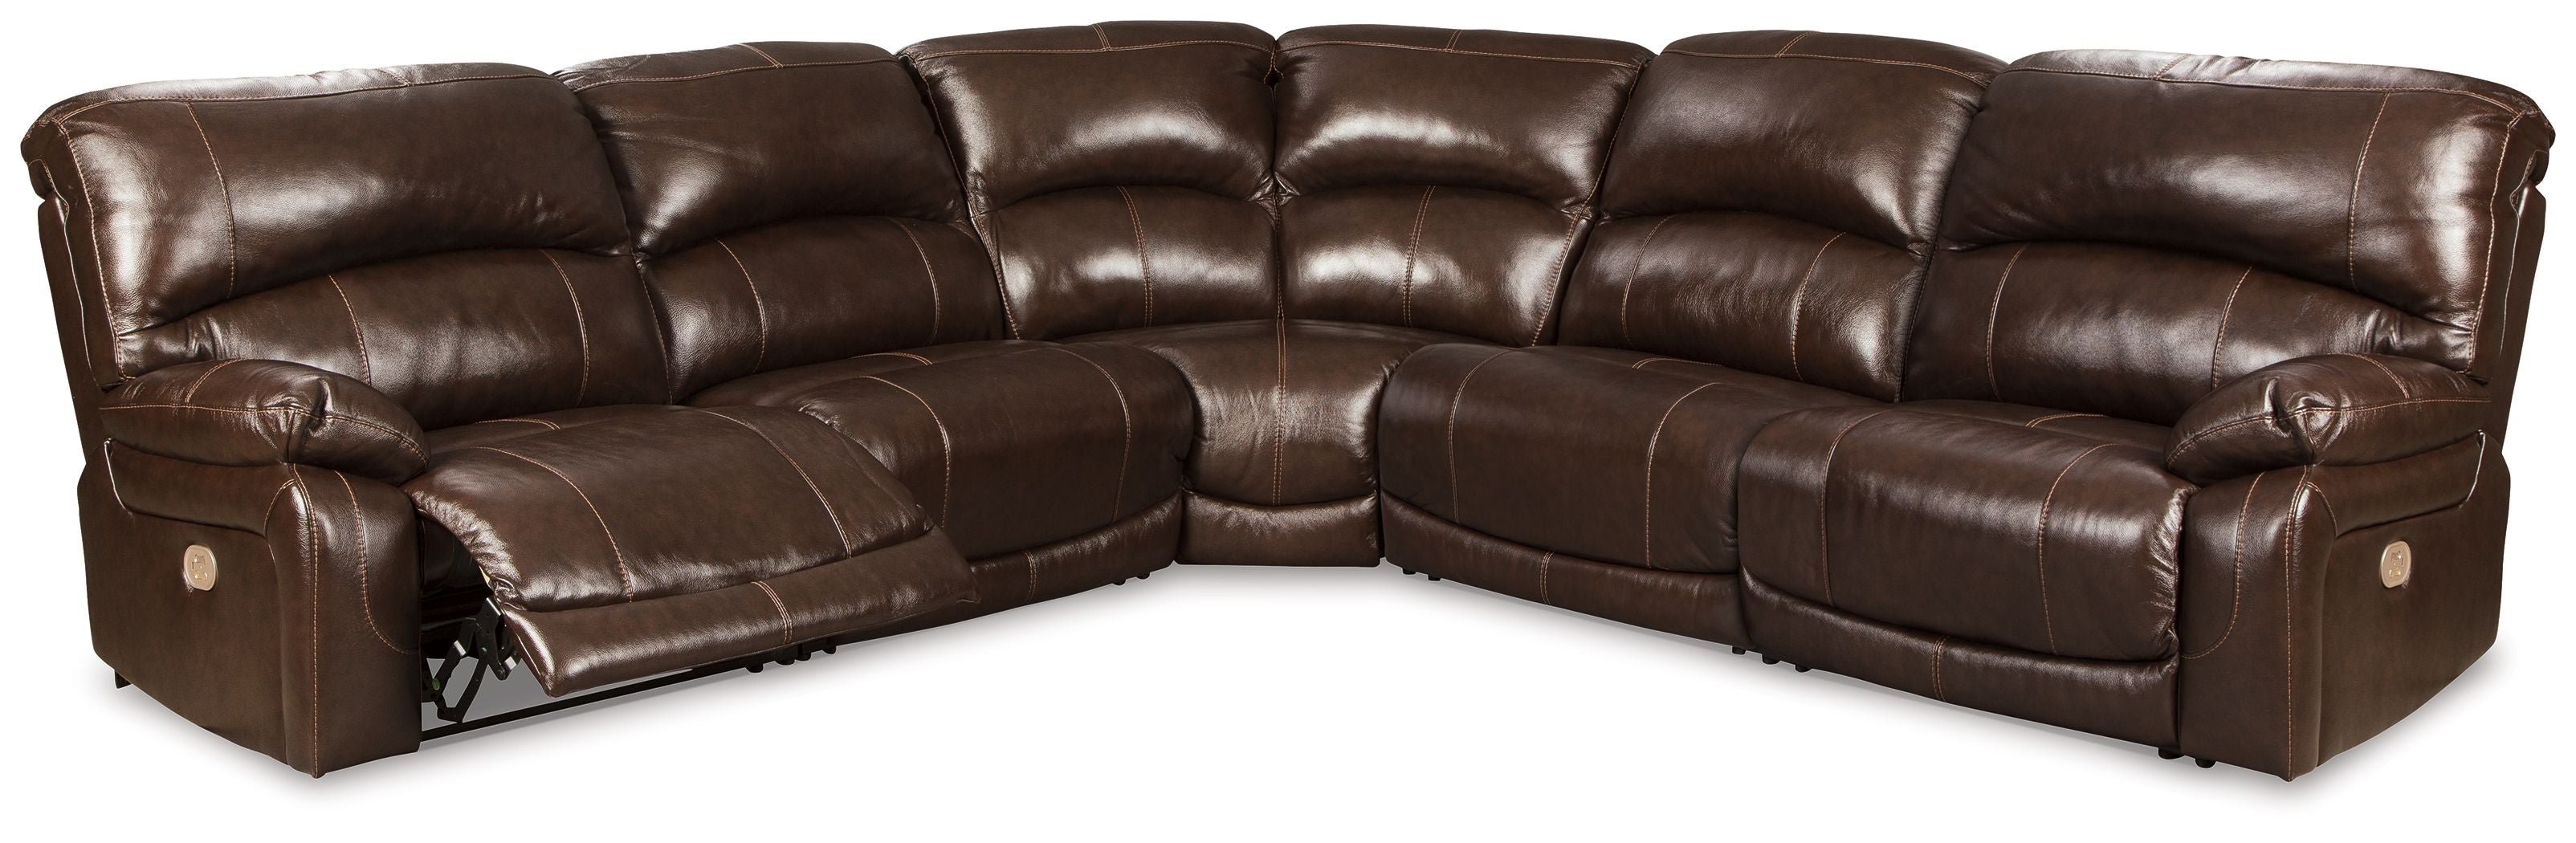 Hallstrung Power Reclining Brown Sectional with Chaise - Plush, USB Charging, Modern